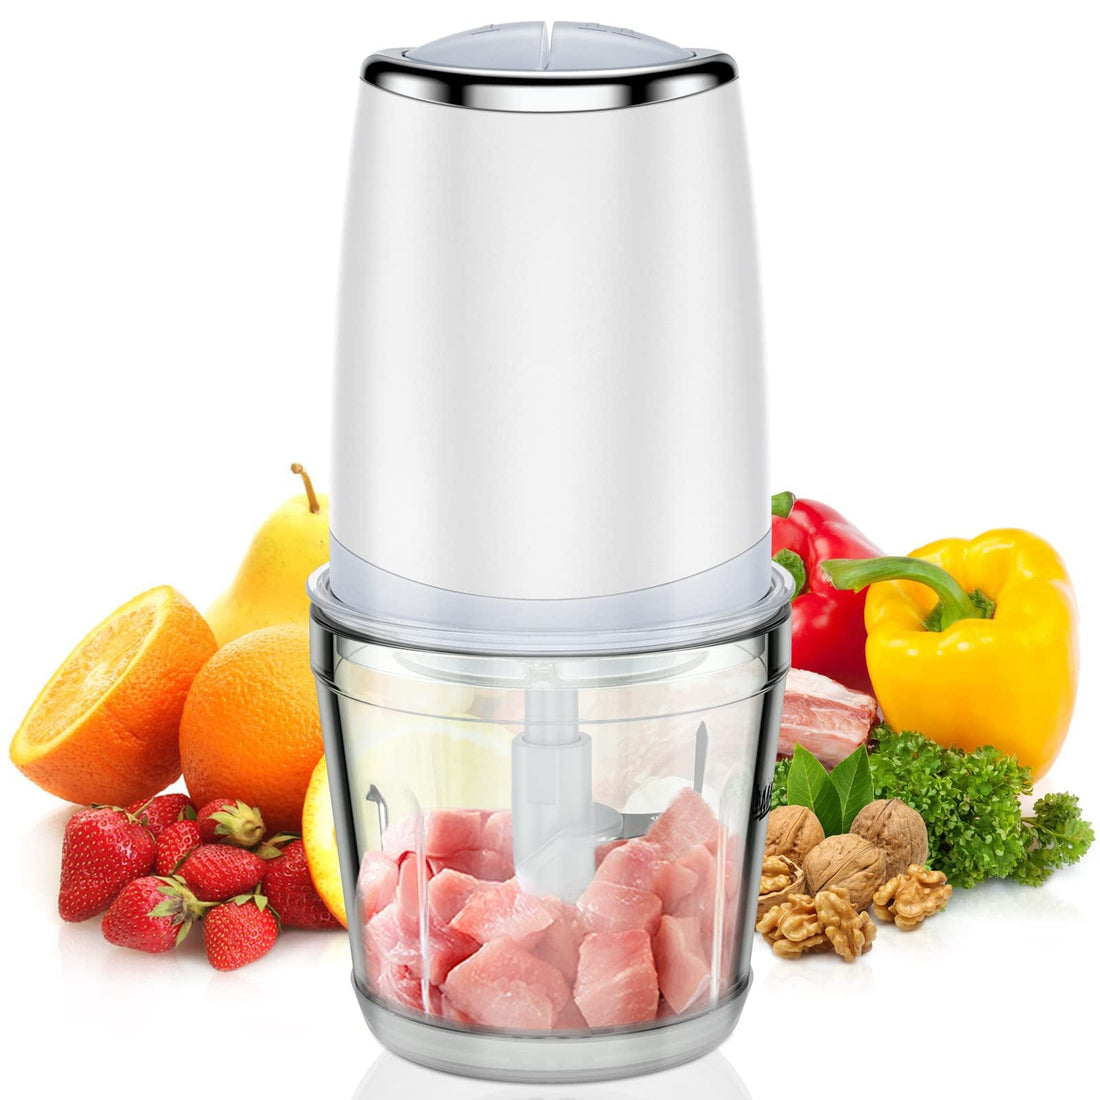 Compact Food Processor, 2.5 Cup Glass Bowl, Electric Chopper - GARVEE